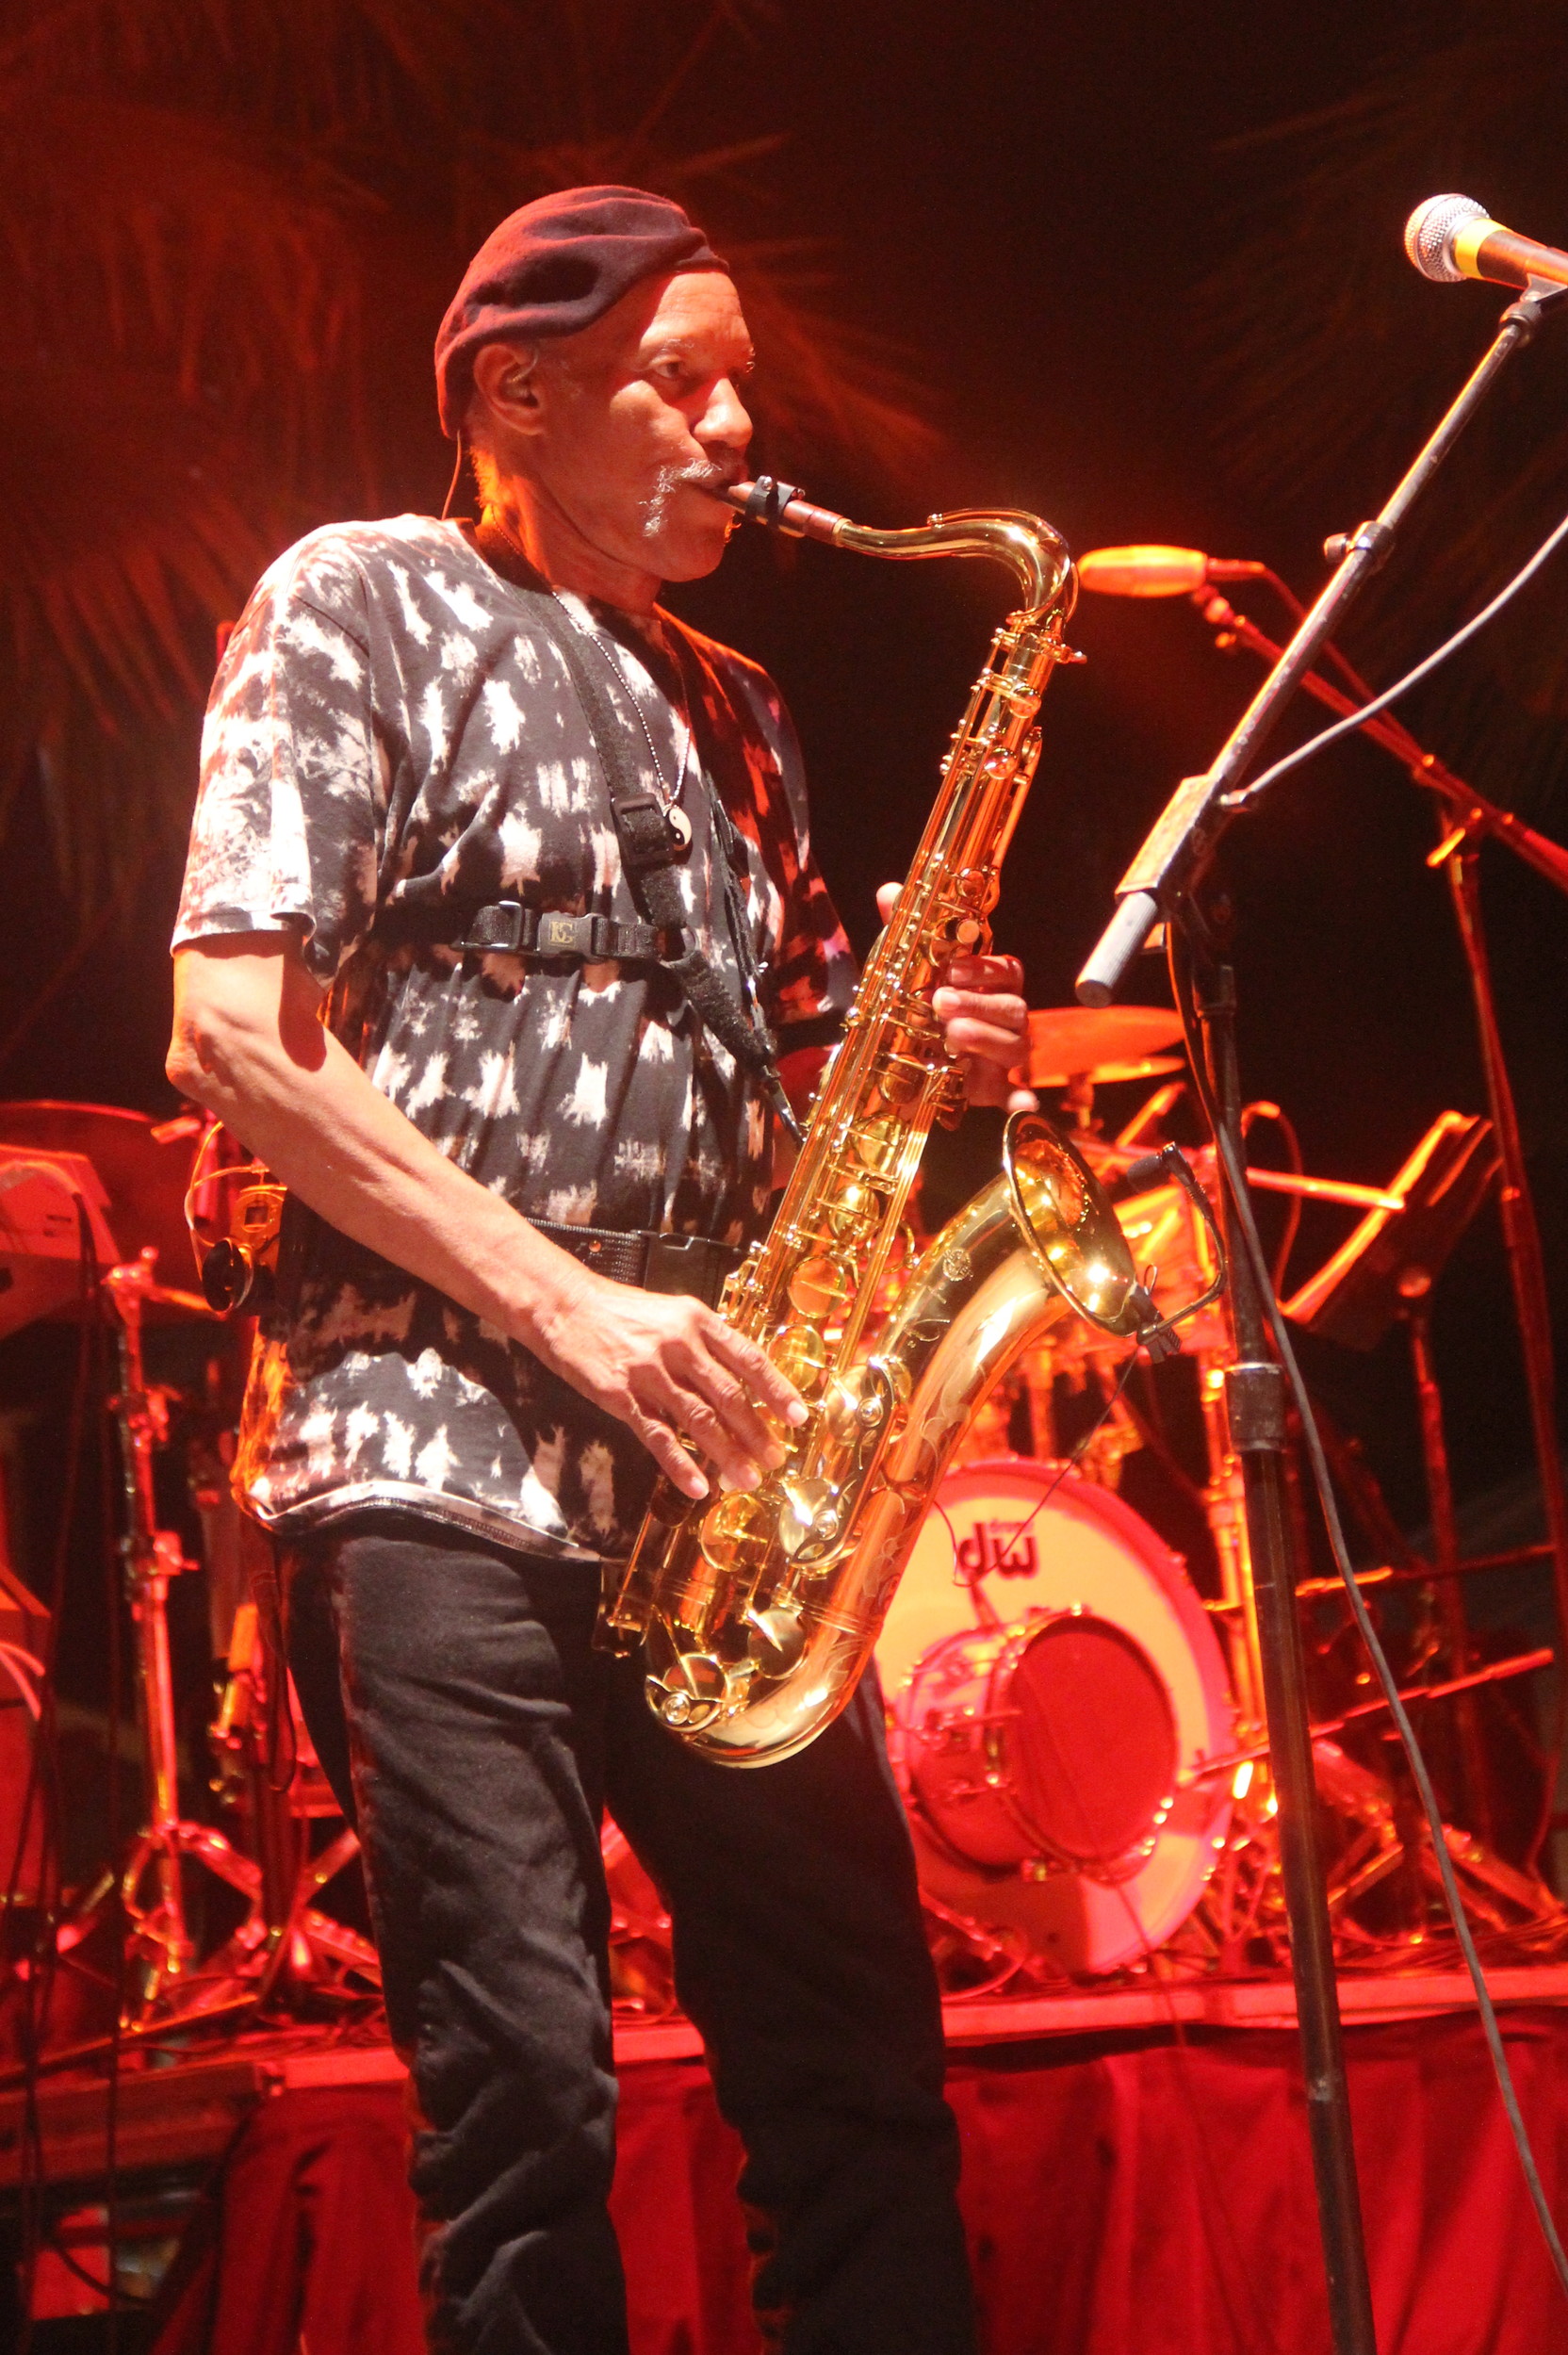 Charles Neville on saxophone accompanying his brother Aaron.